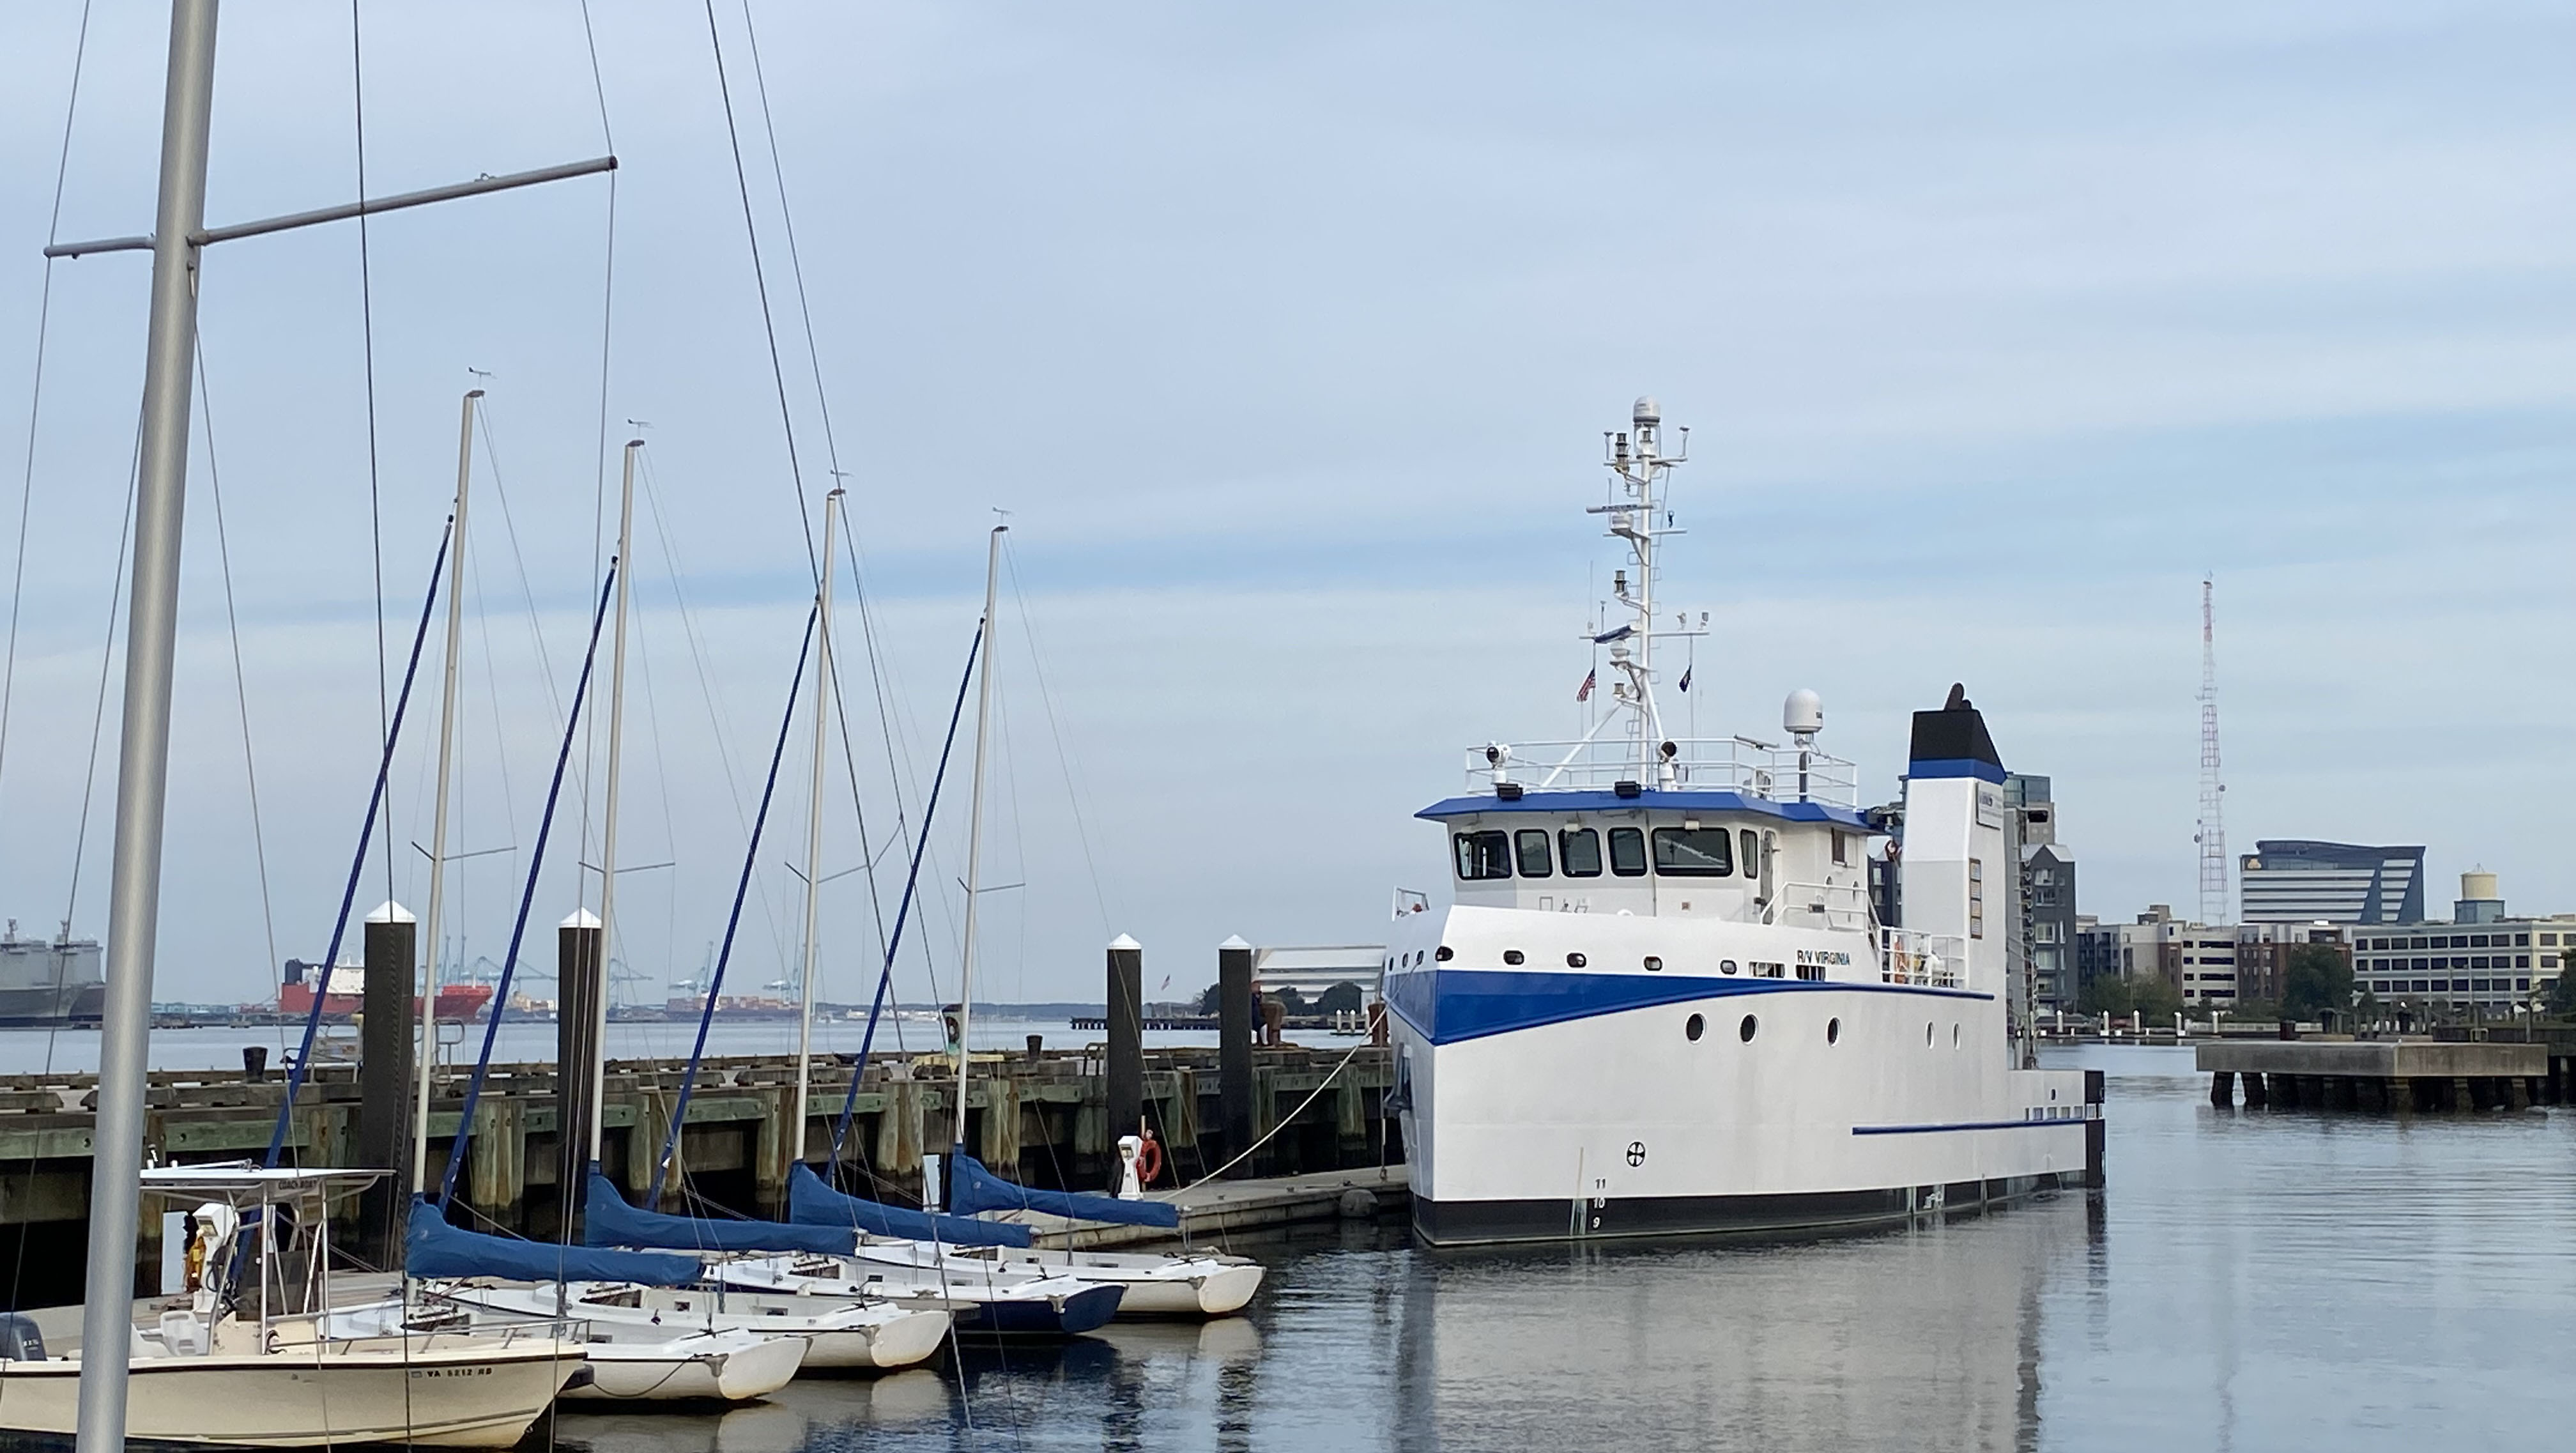 The VIMS research vessel, called the R/V Virginia, docked at Nauticus in Norfolk on Thursday, Sept. 21. (Photo by Katherine Hafner)